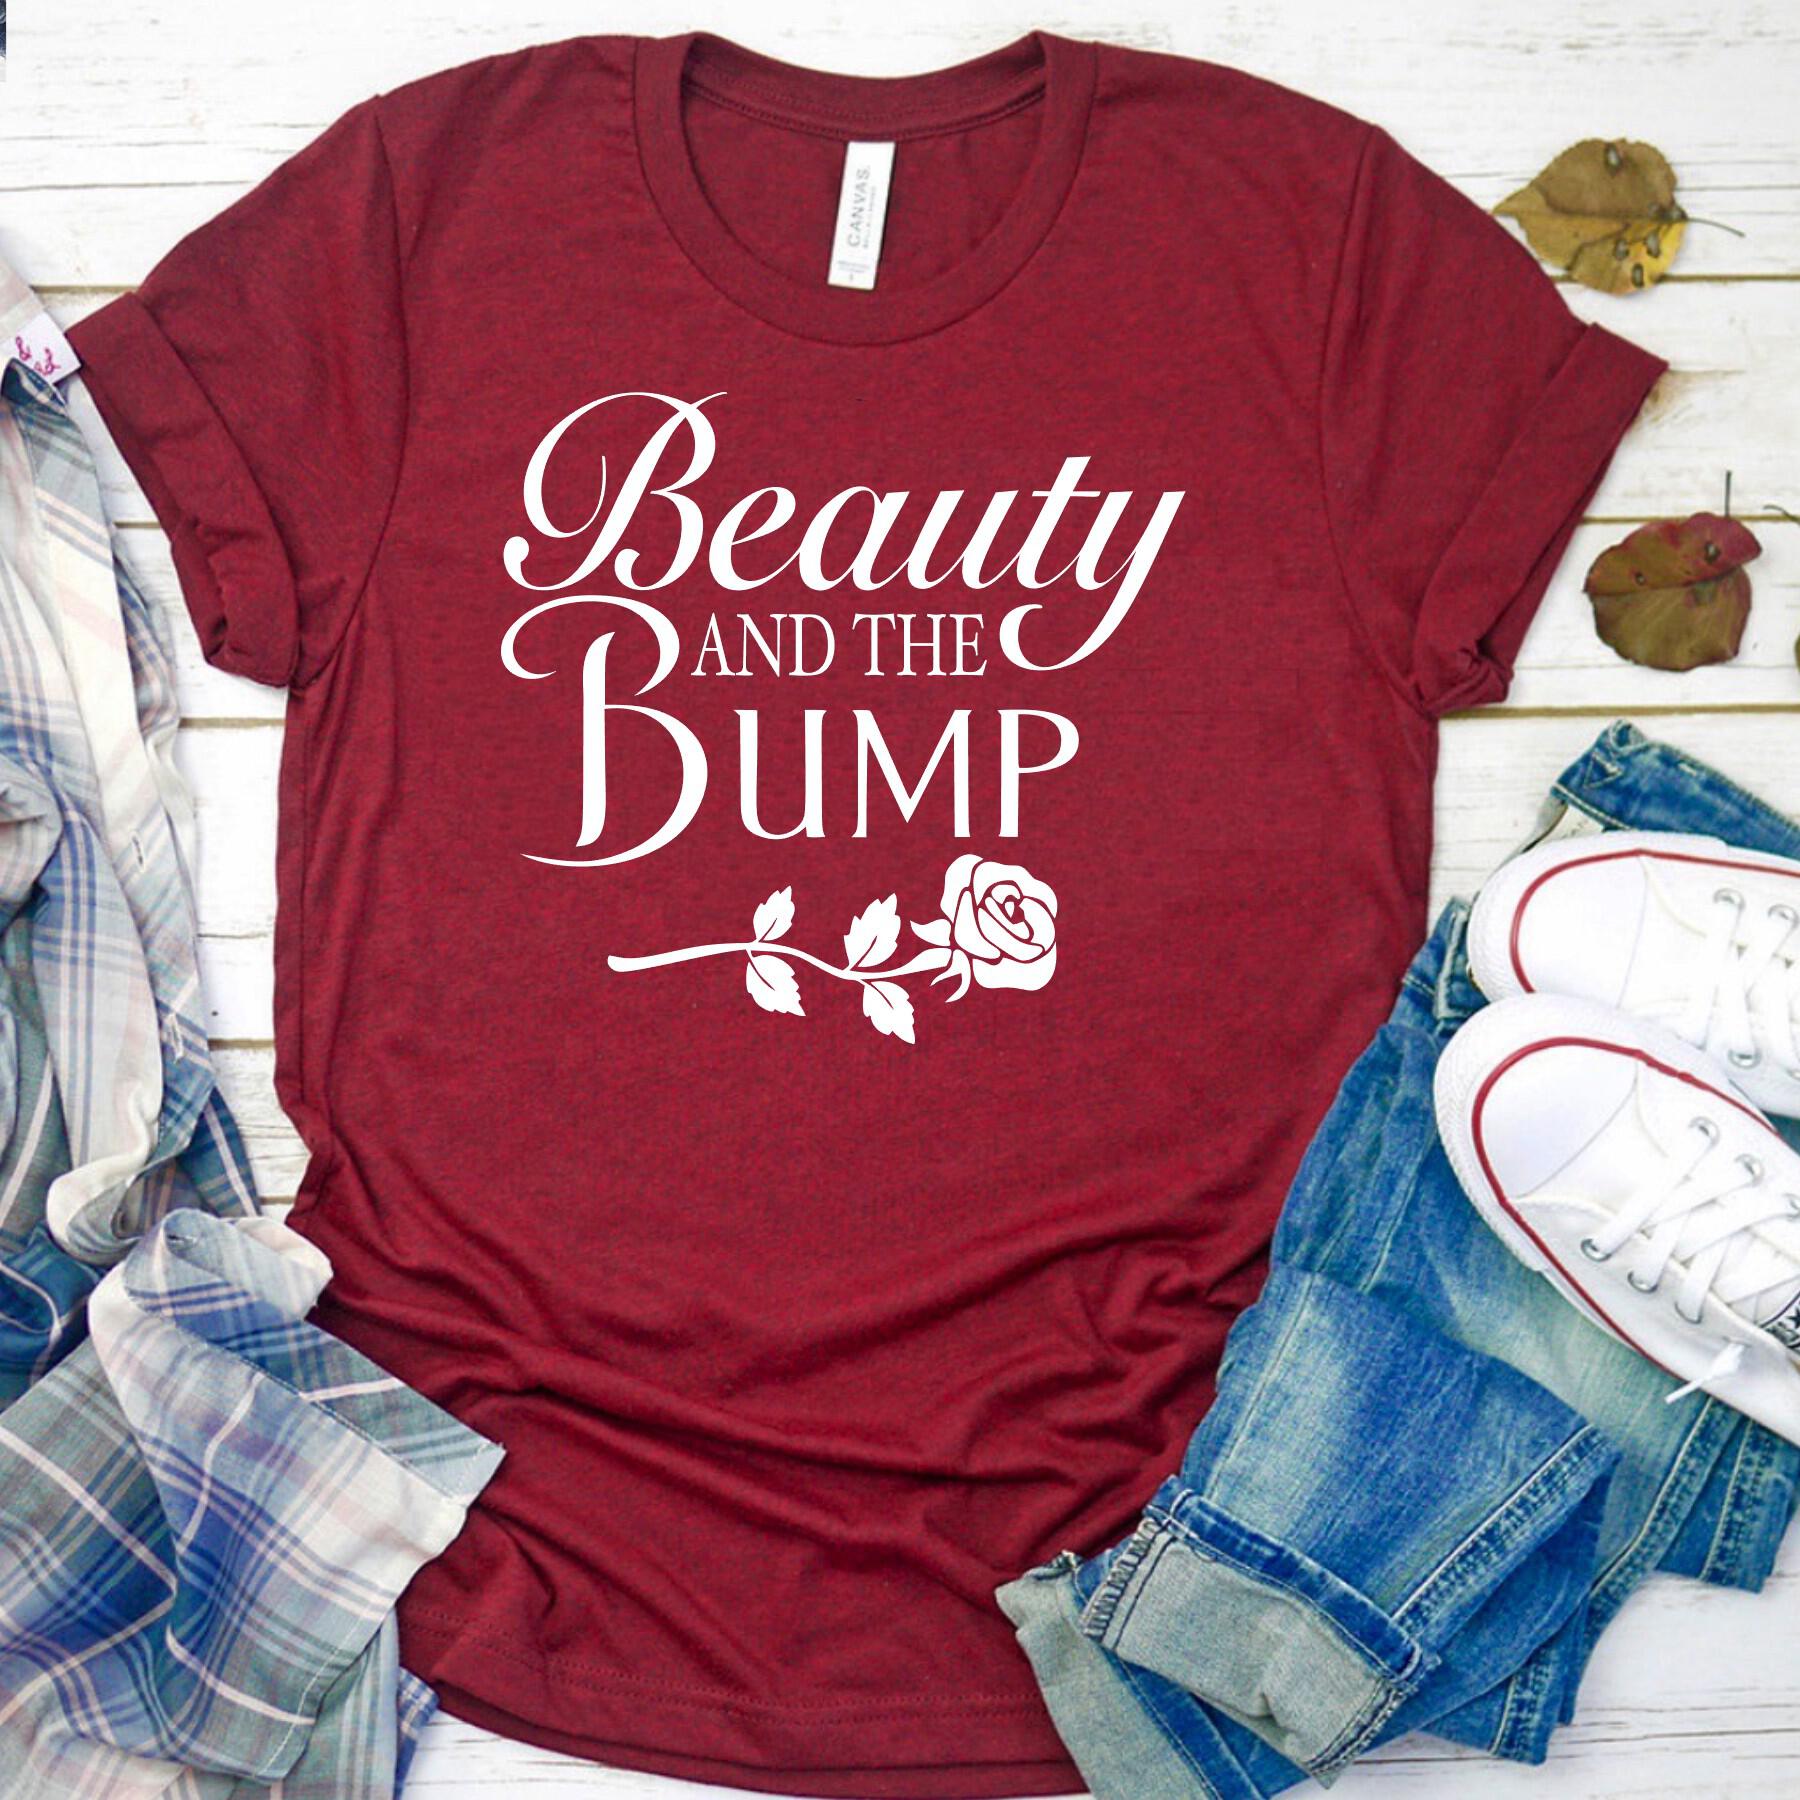 Beauty and The Bump, Pregnancy Announcement Shirt, Disney Maternity, Funny  Pregnancy Shirt, Beauty and the Beast Shirt, Bump Alert, Funny Bump Shirt,  Disney Pregnancy, Disney Bump Adult Unisex Shirts